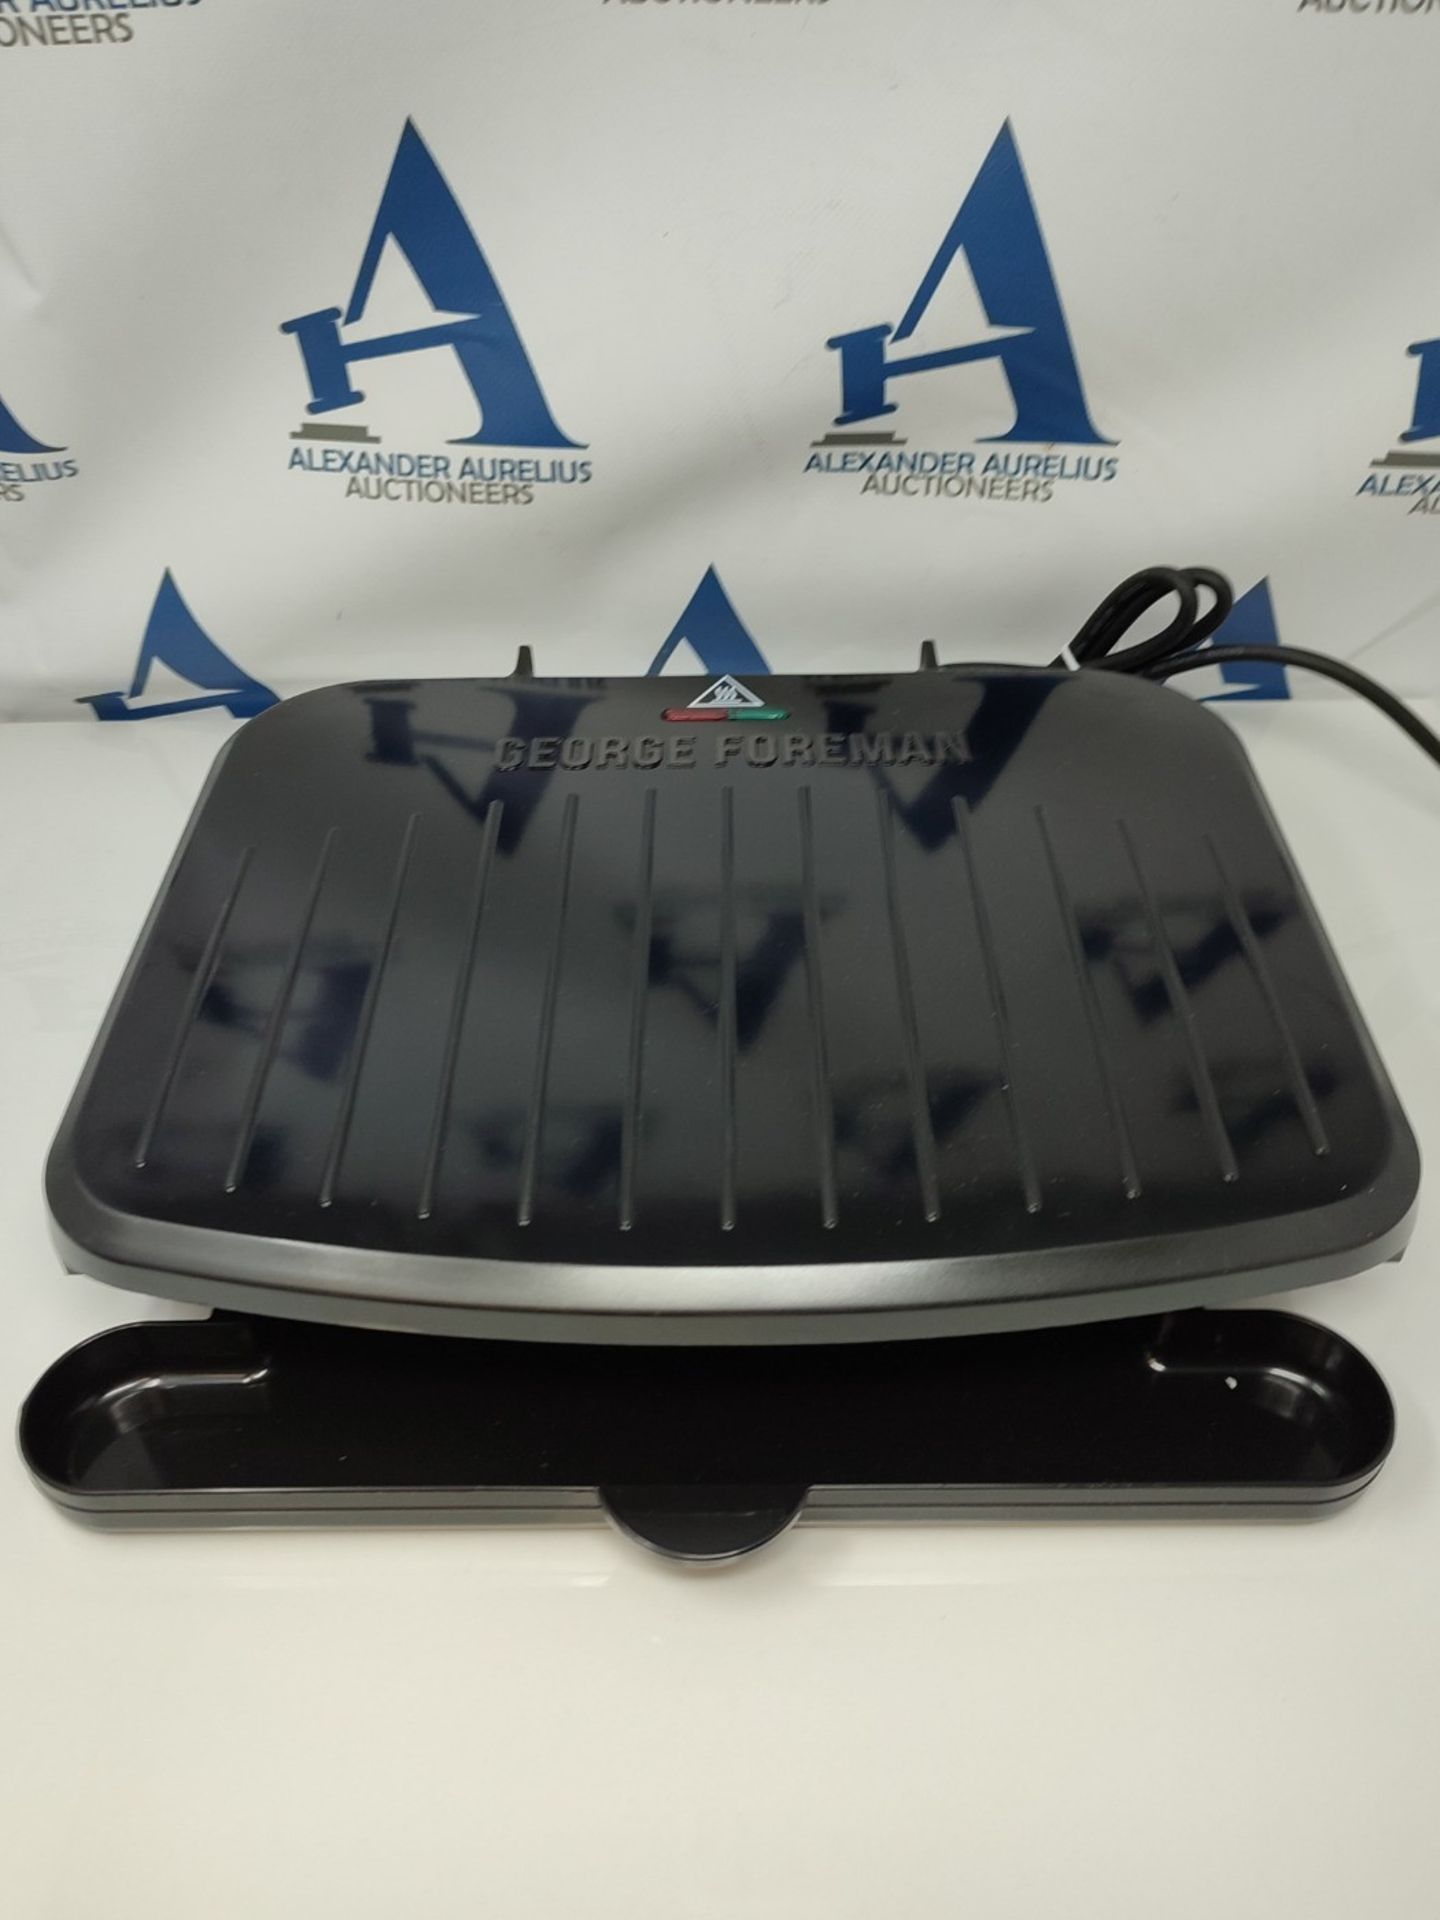 George Foreman 25810 Medium Fit Grill - Versatile Griddle, Hot Plate and Toastie Machi - Image 3 of 3